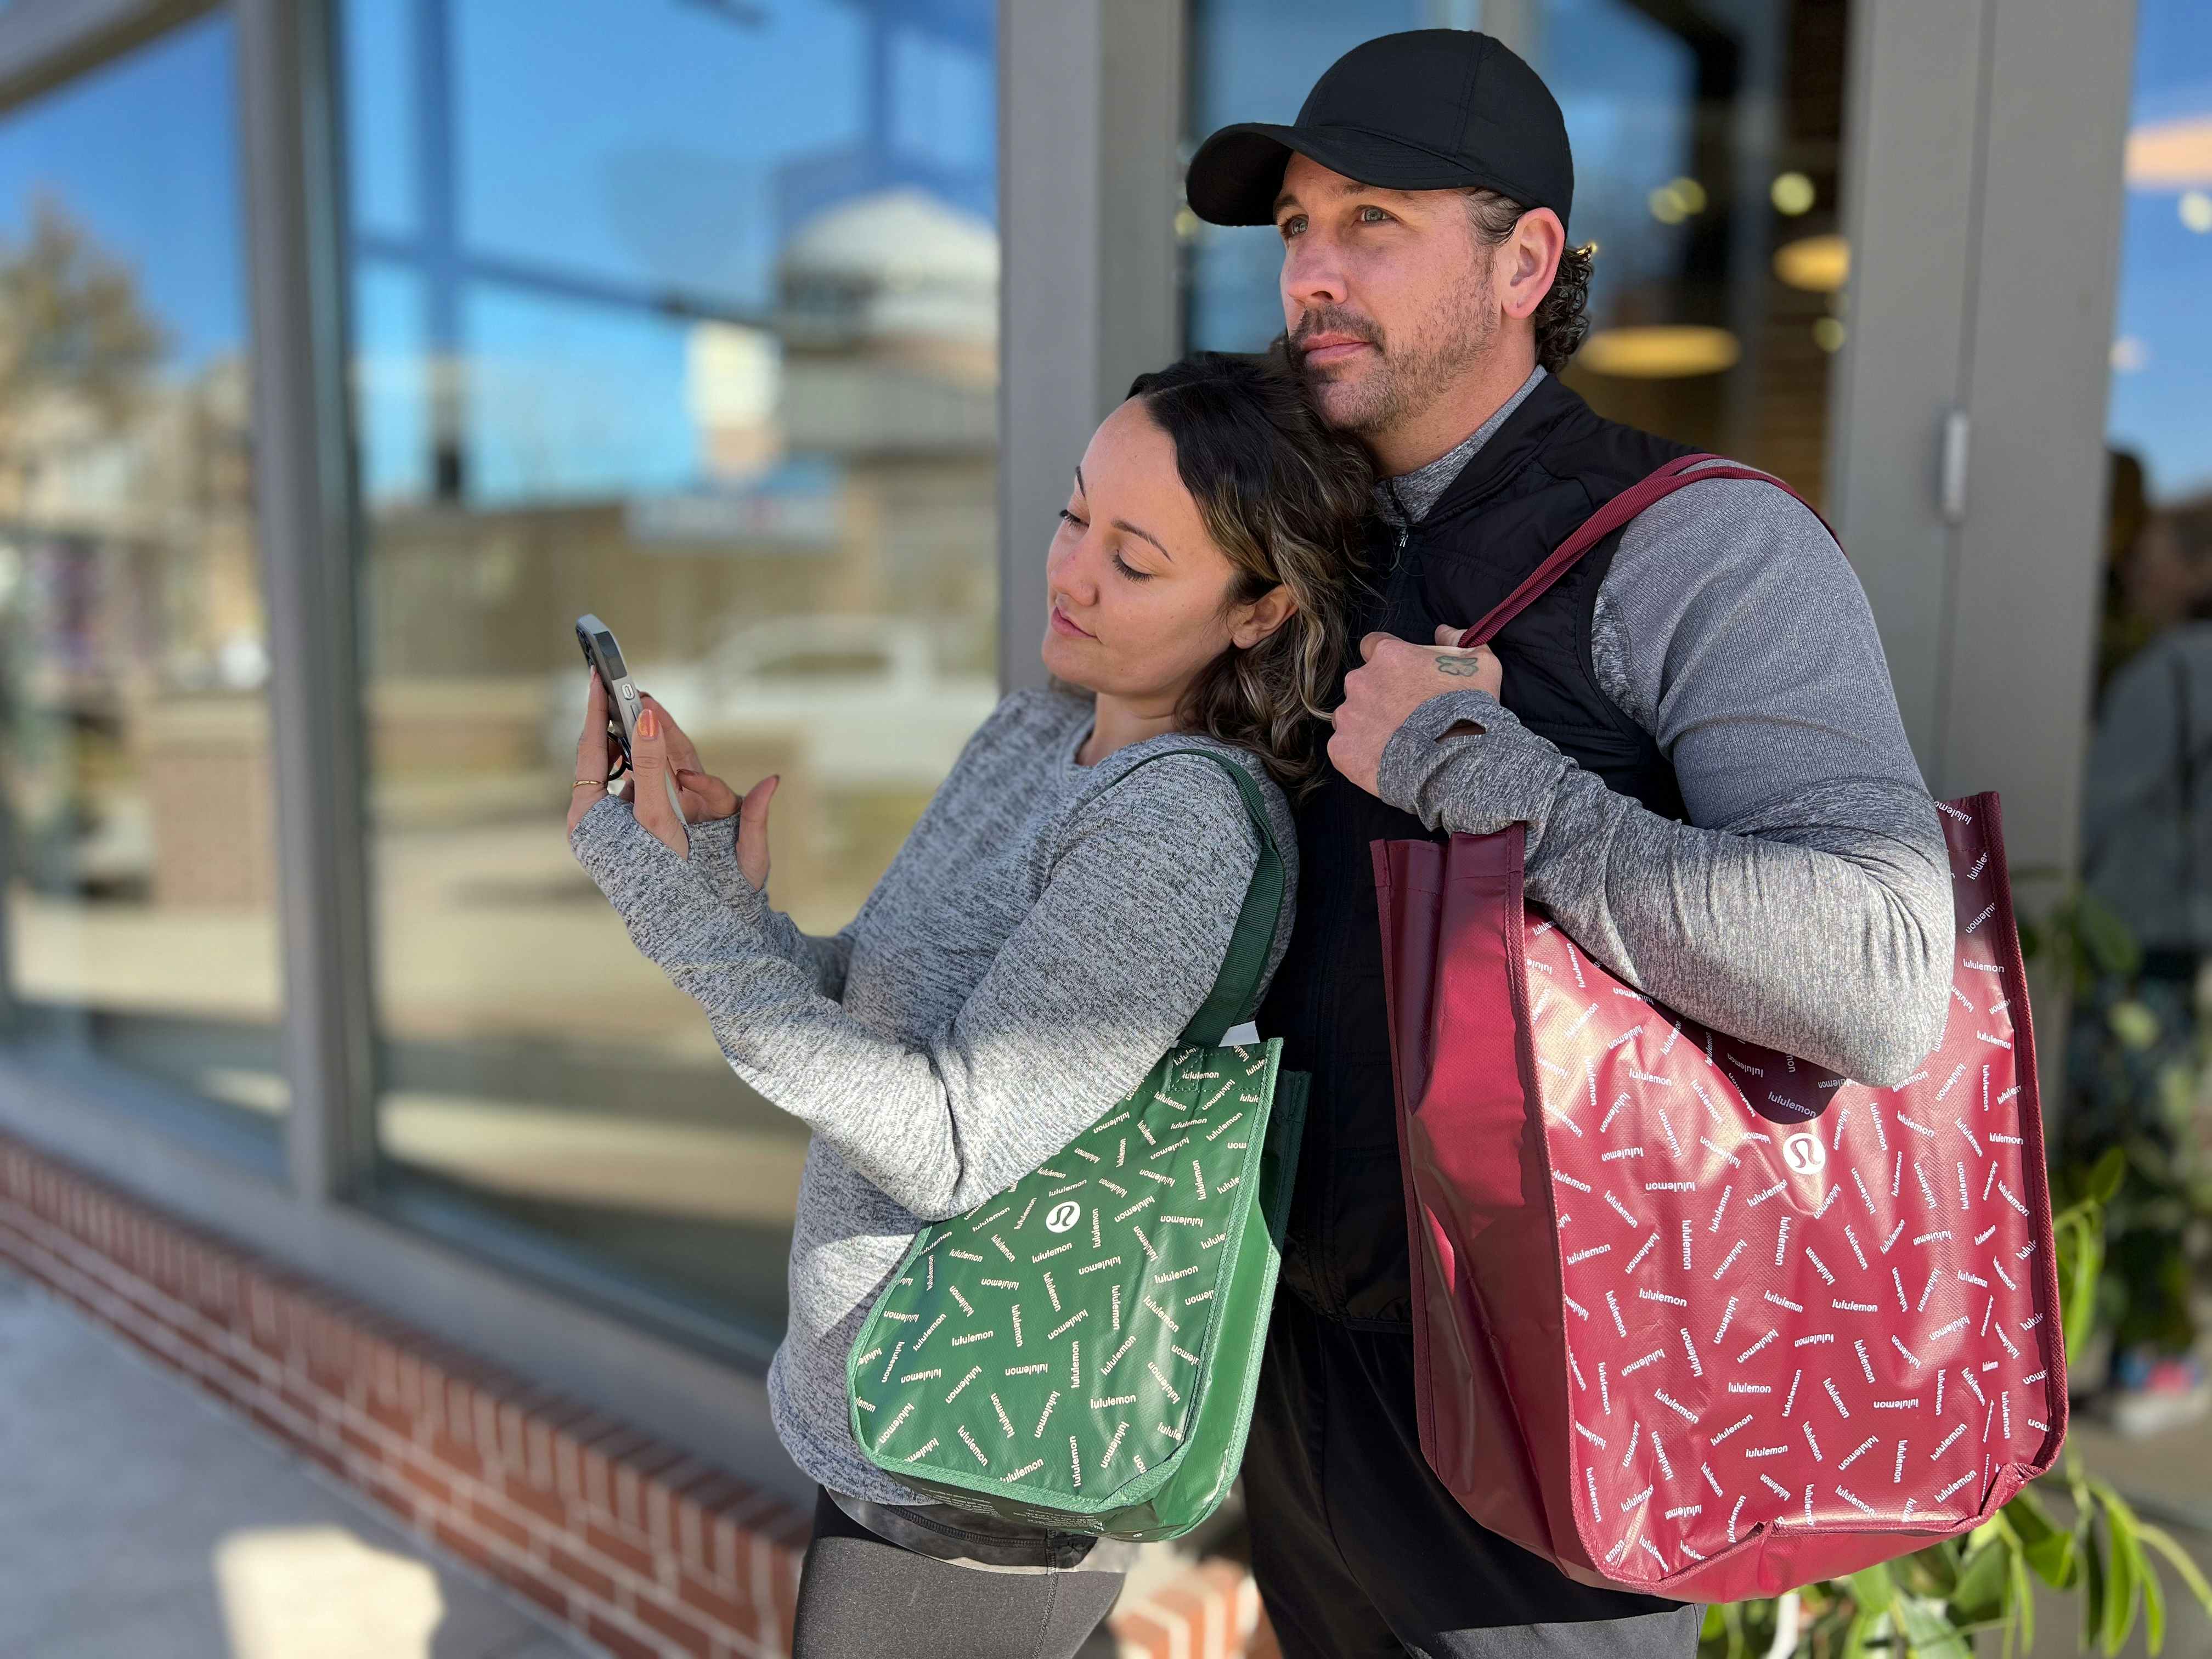 couple outside lululemon store on cell phone holding bags